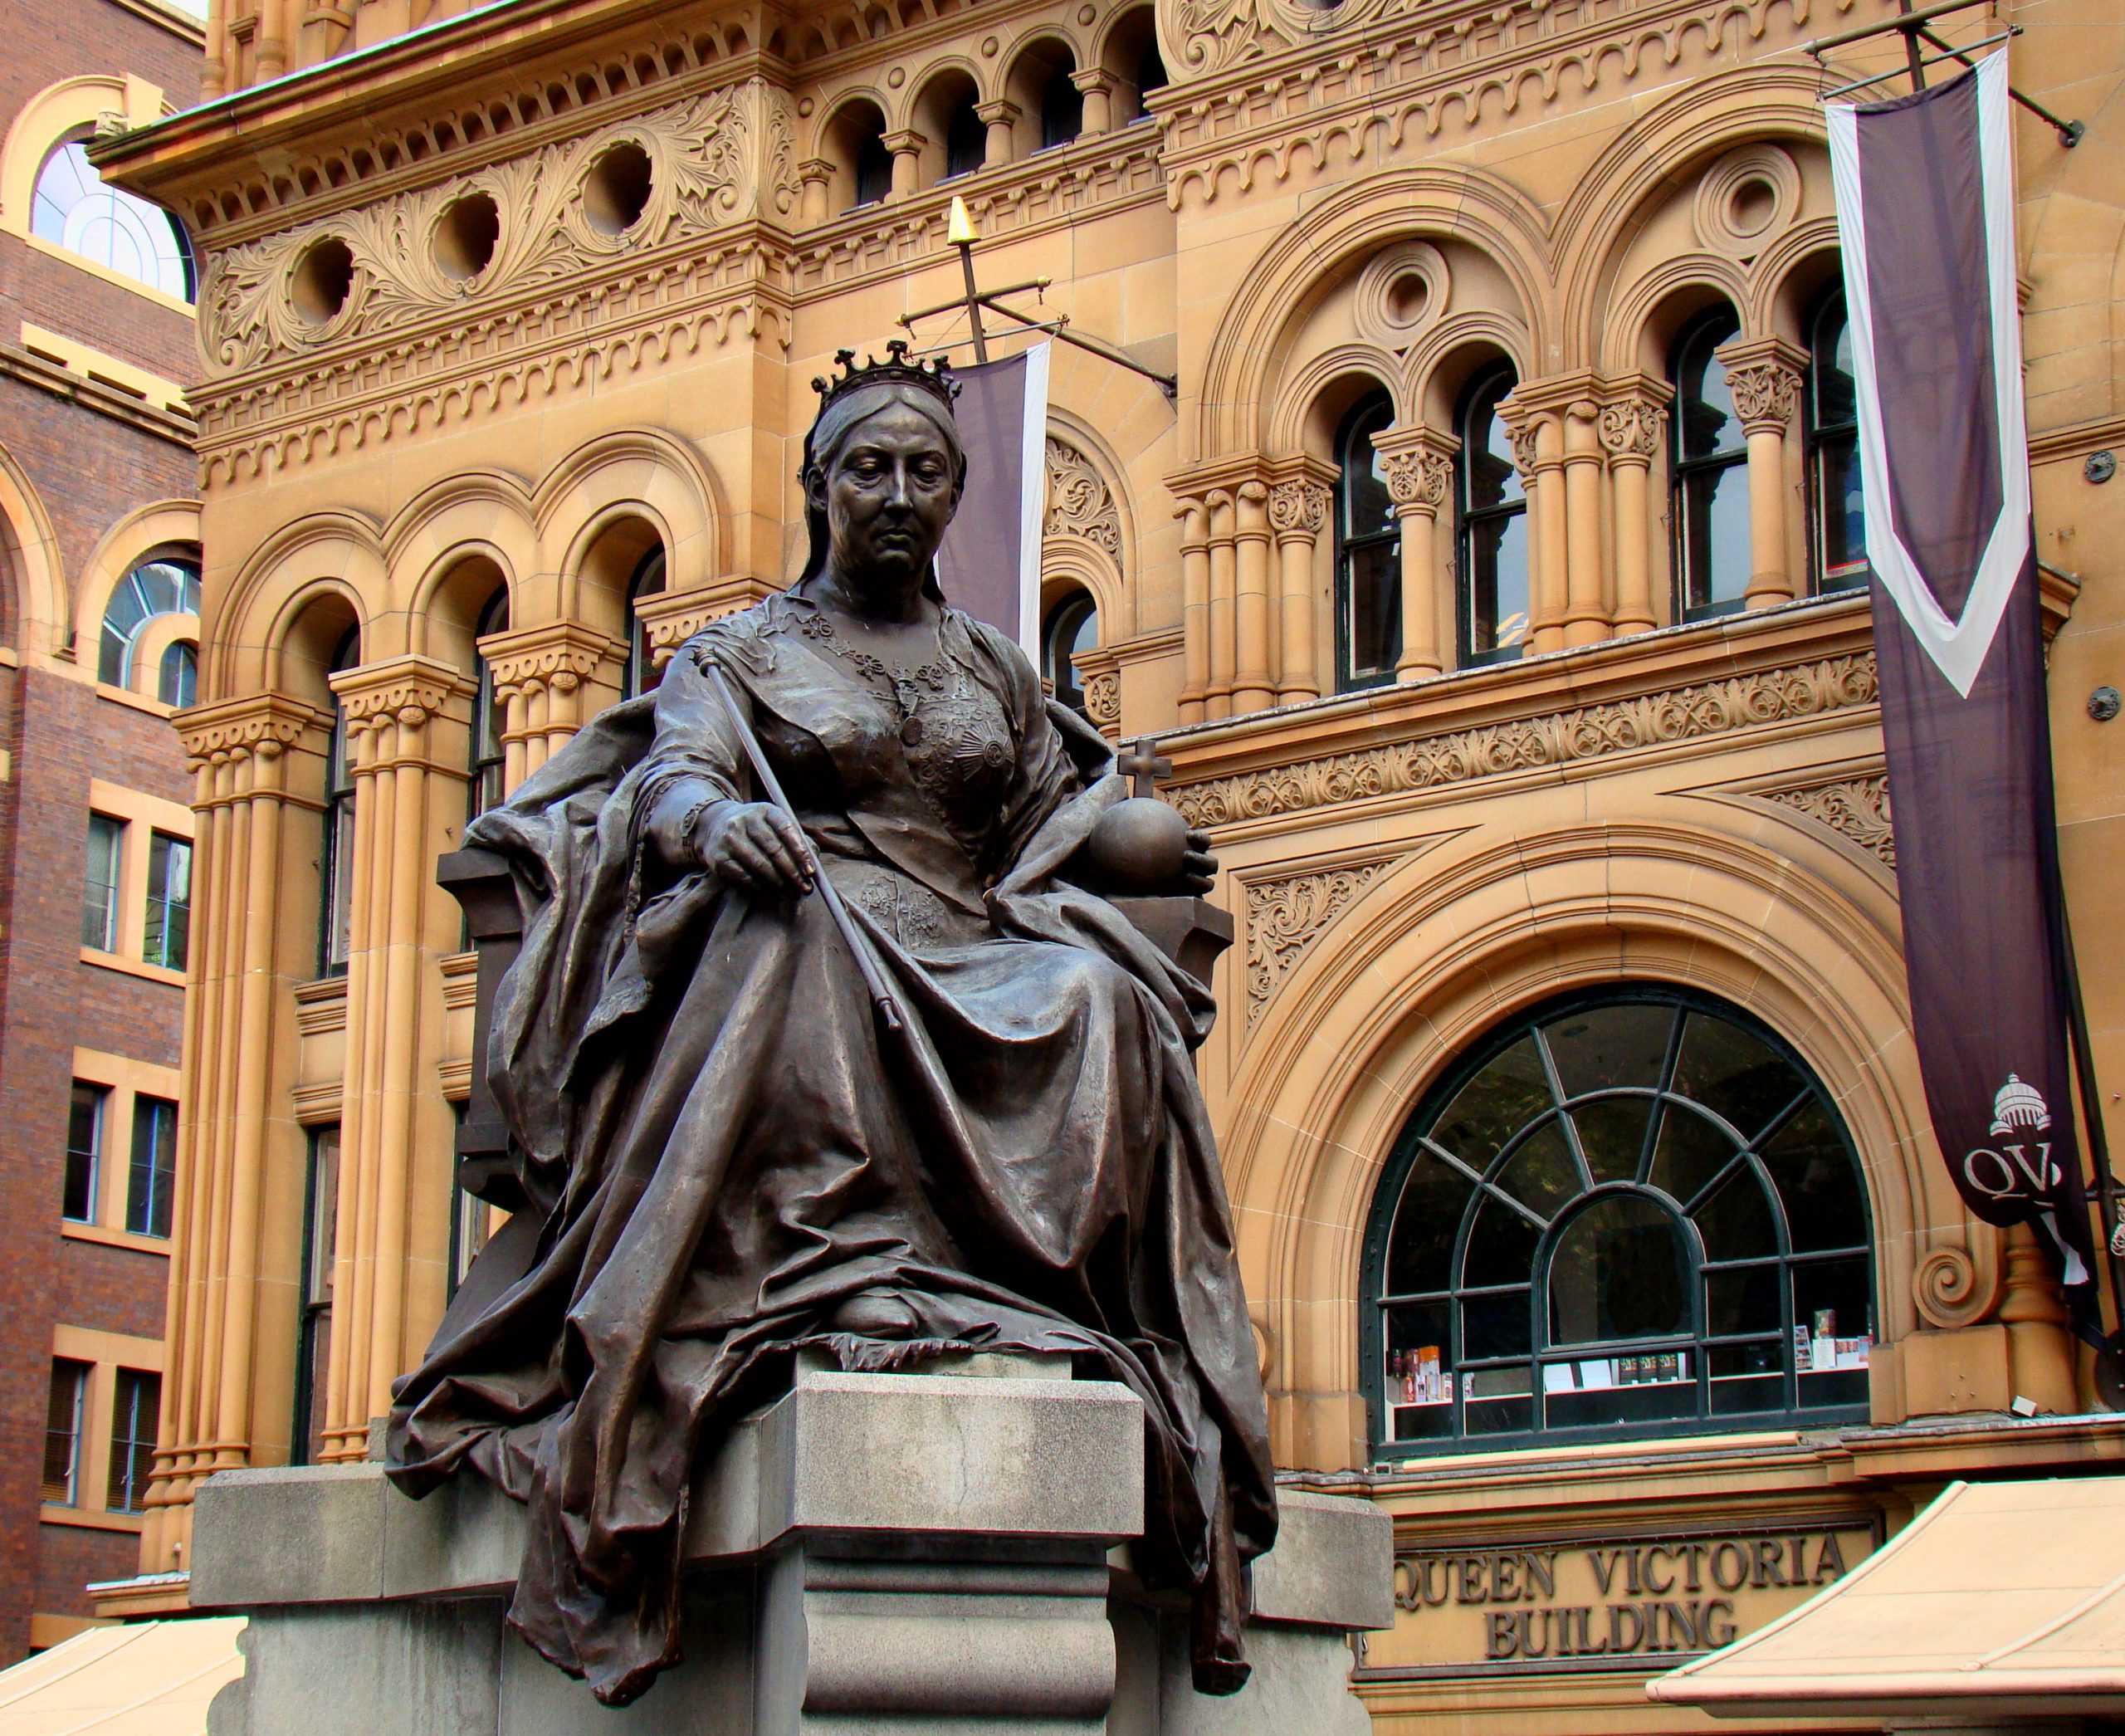 The Queen Victoria statue - large bronze statue of woman sitting on throne